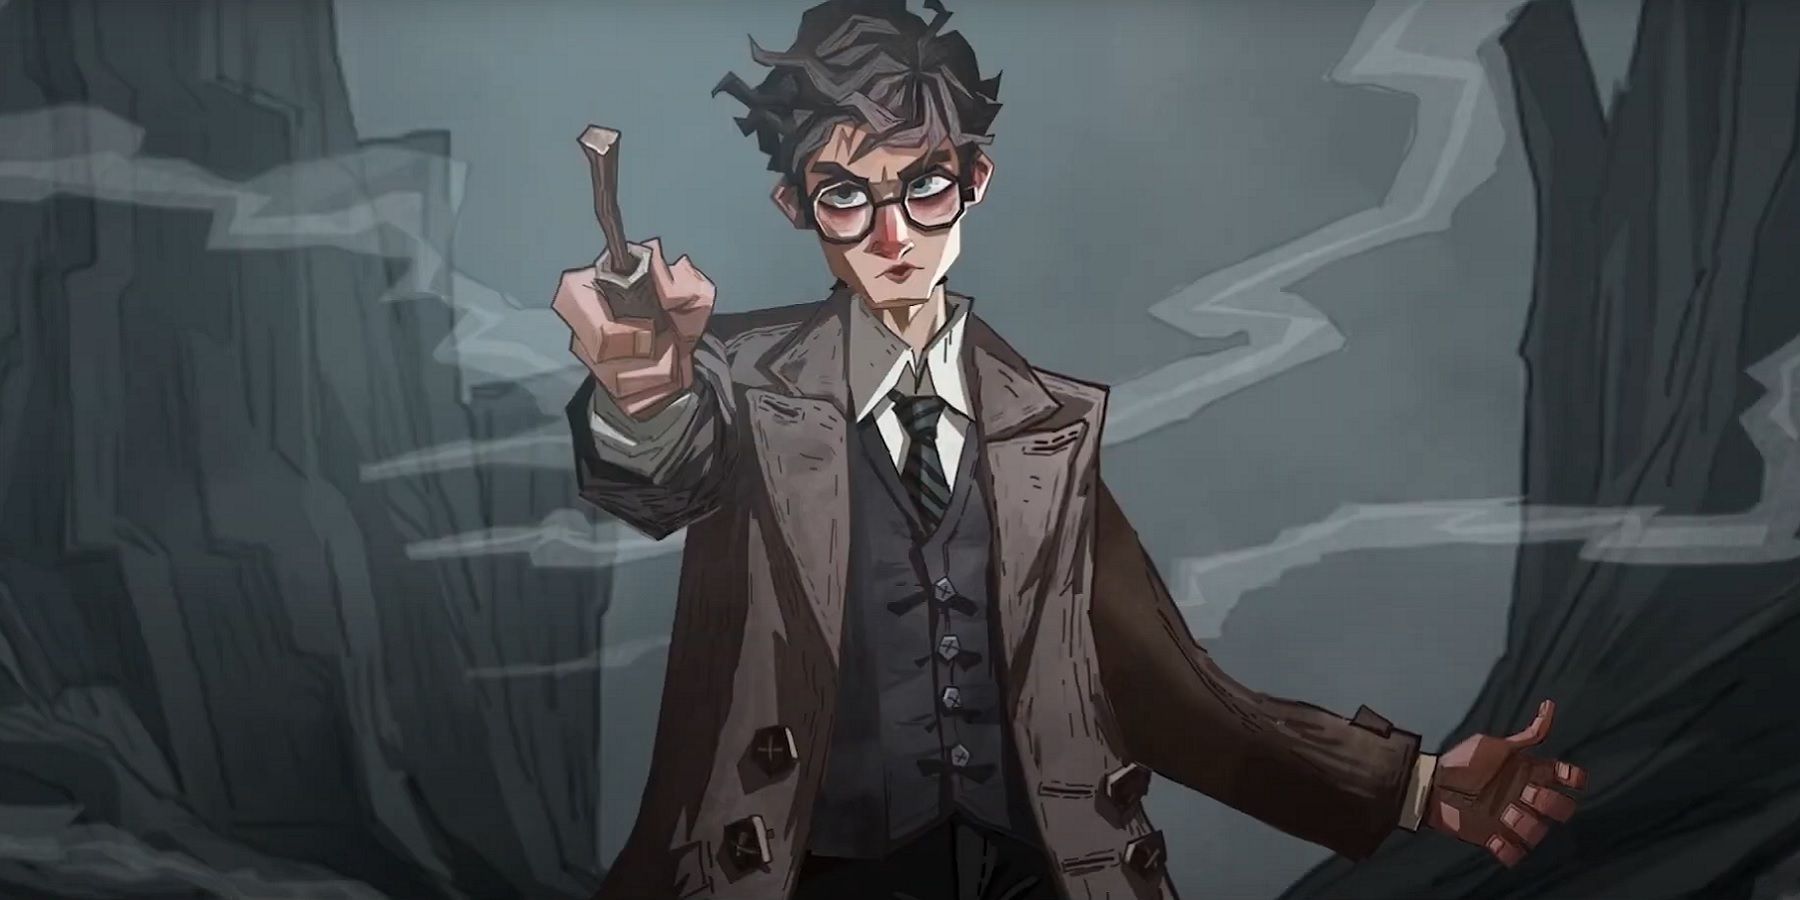 A New Harry Potter Game is Launching Next Week